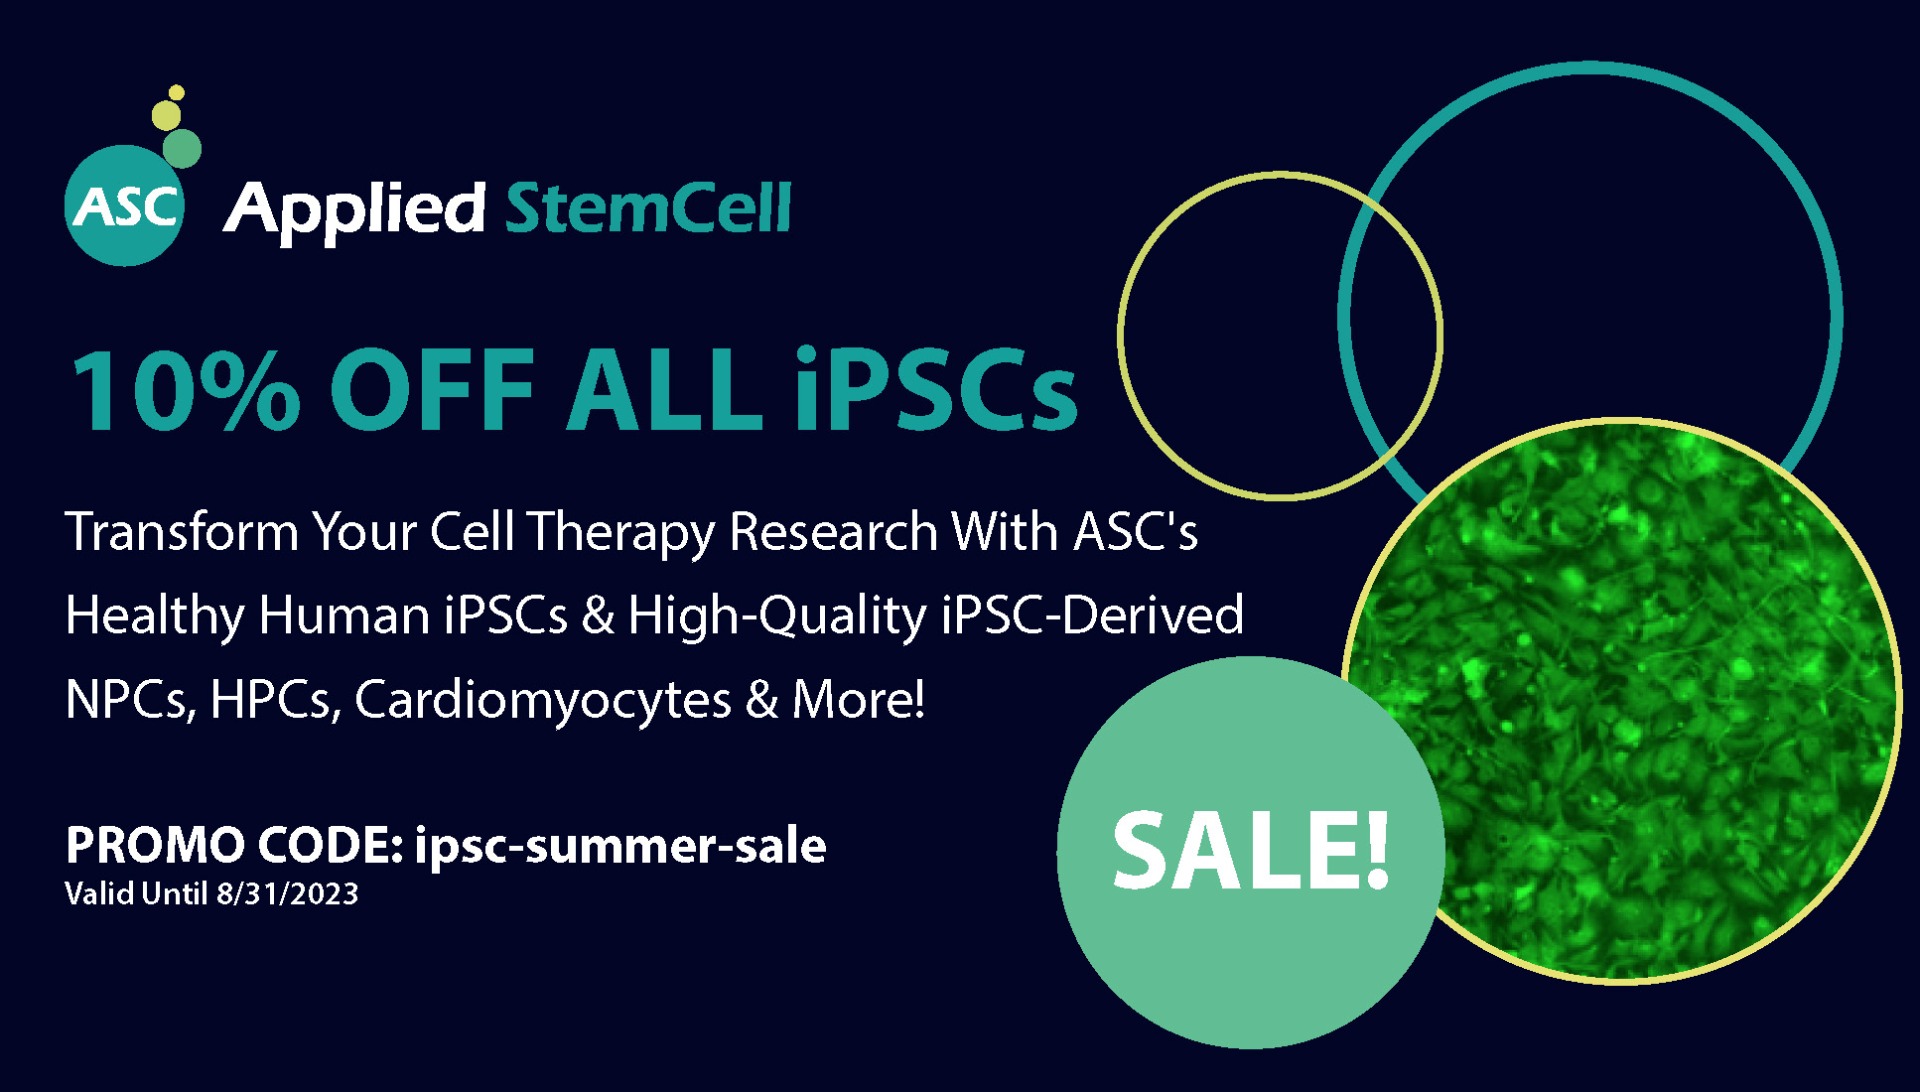 Summer Cell Sale! 10% OFF ALL iPSCs